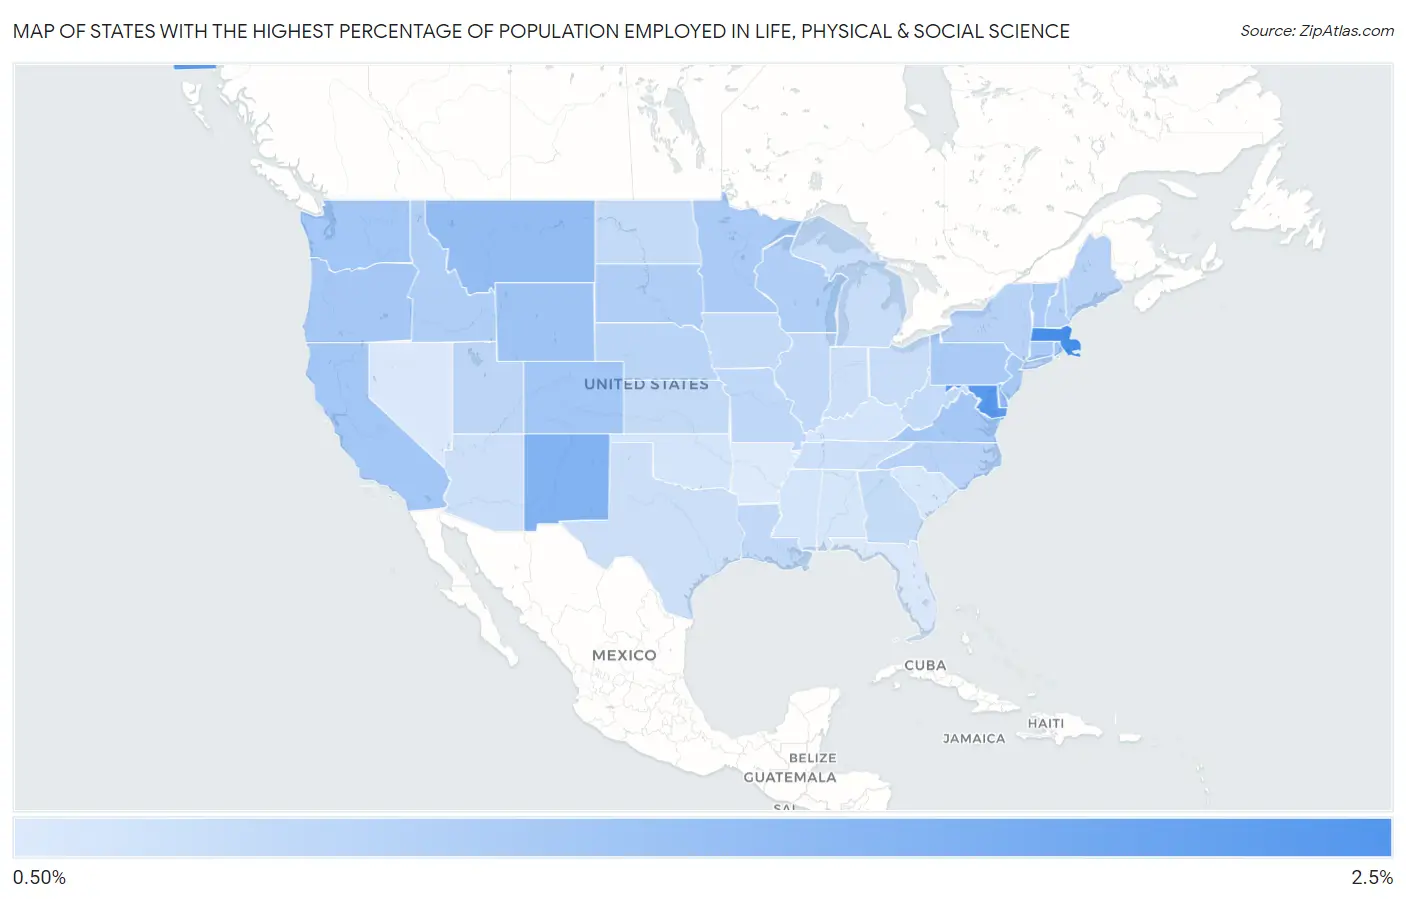 States with the Highest Percentage of Population Employed in Life, Physical & Social Science in the United States Map